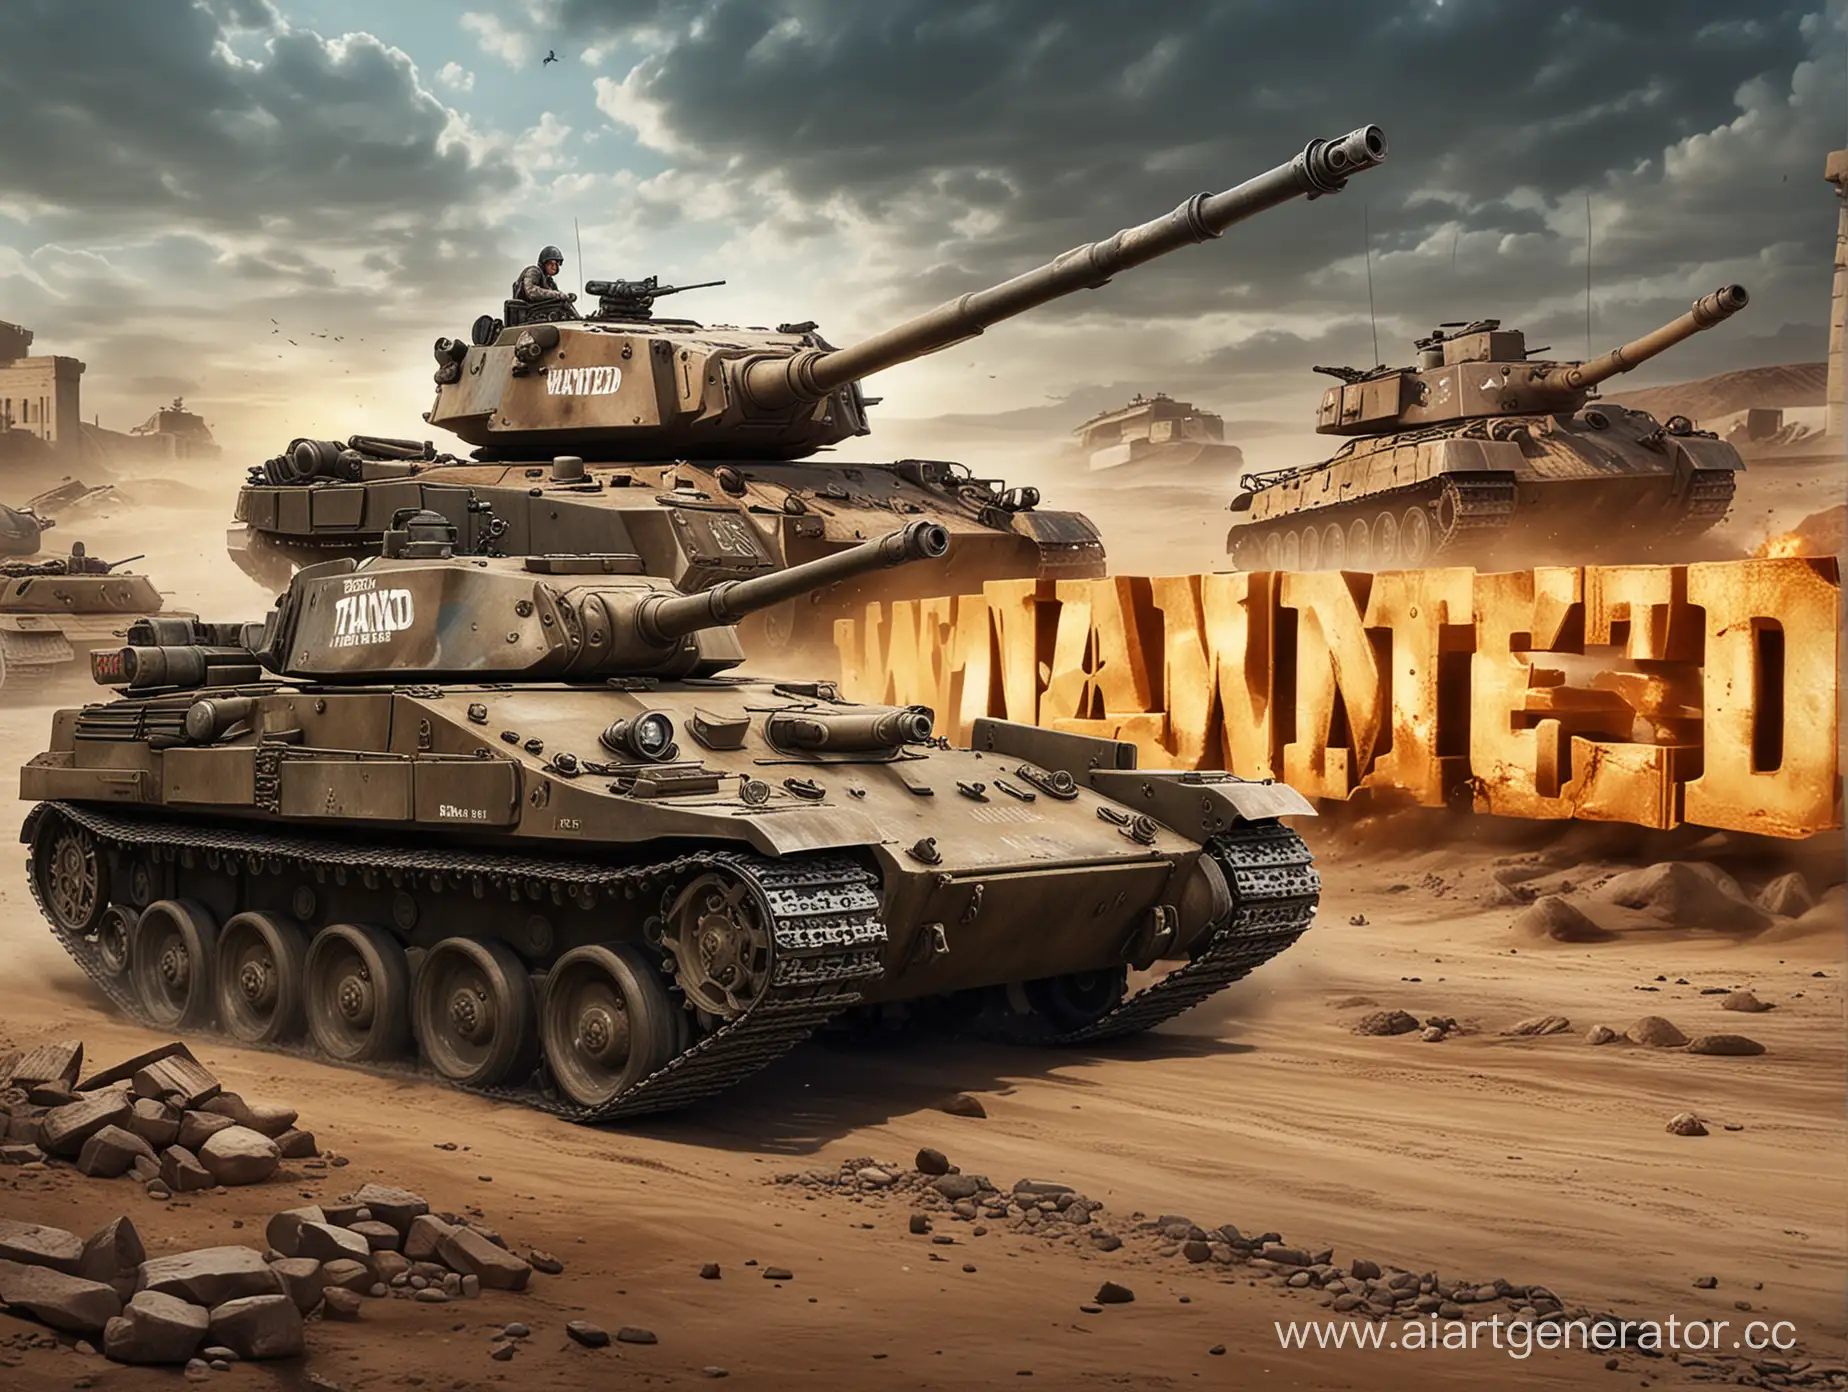 WANTED-Tanki-Online-Game-Poster-with-Military-Tank